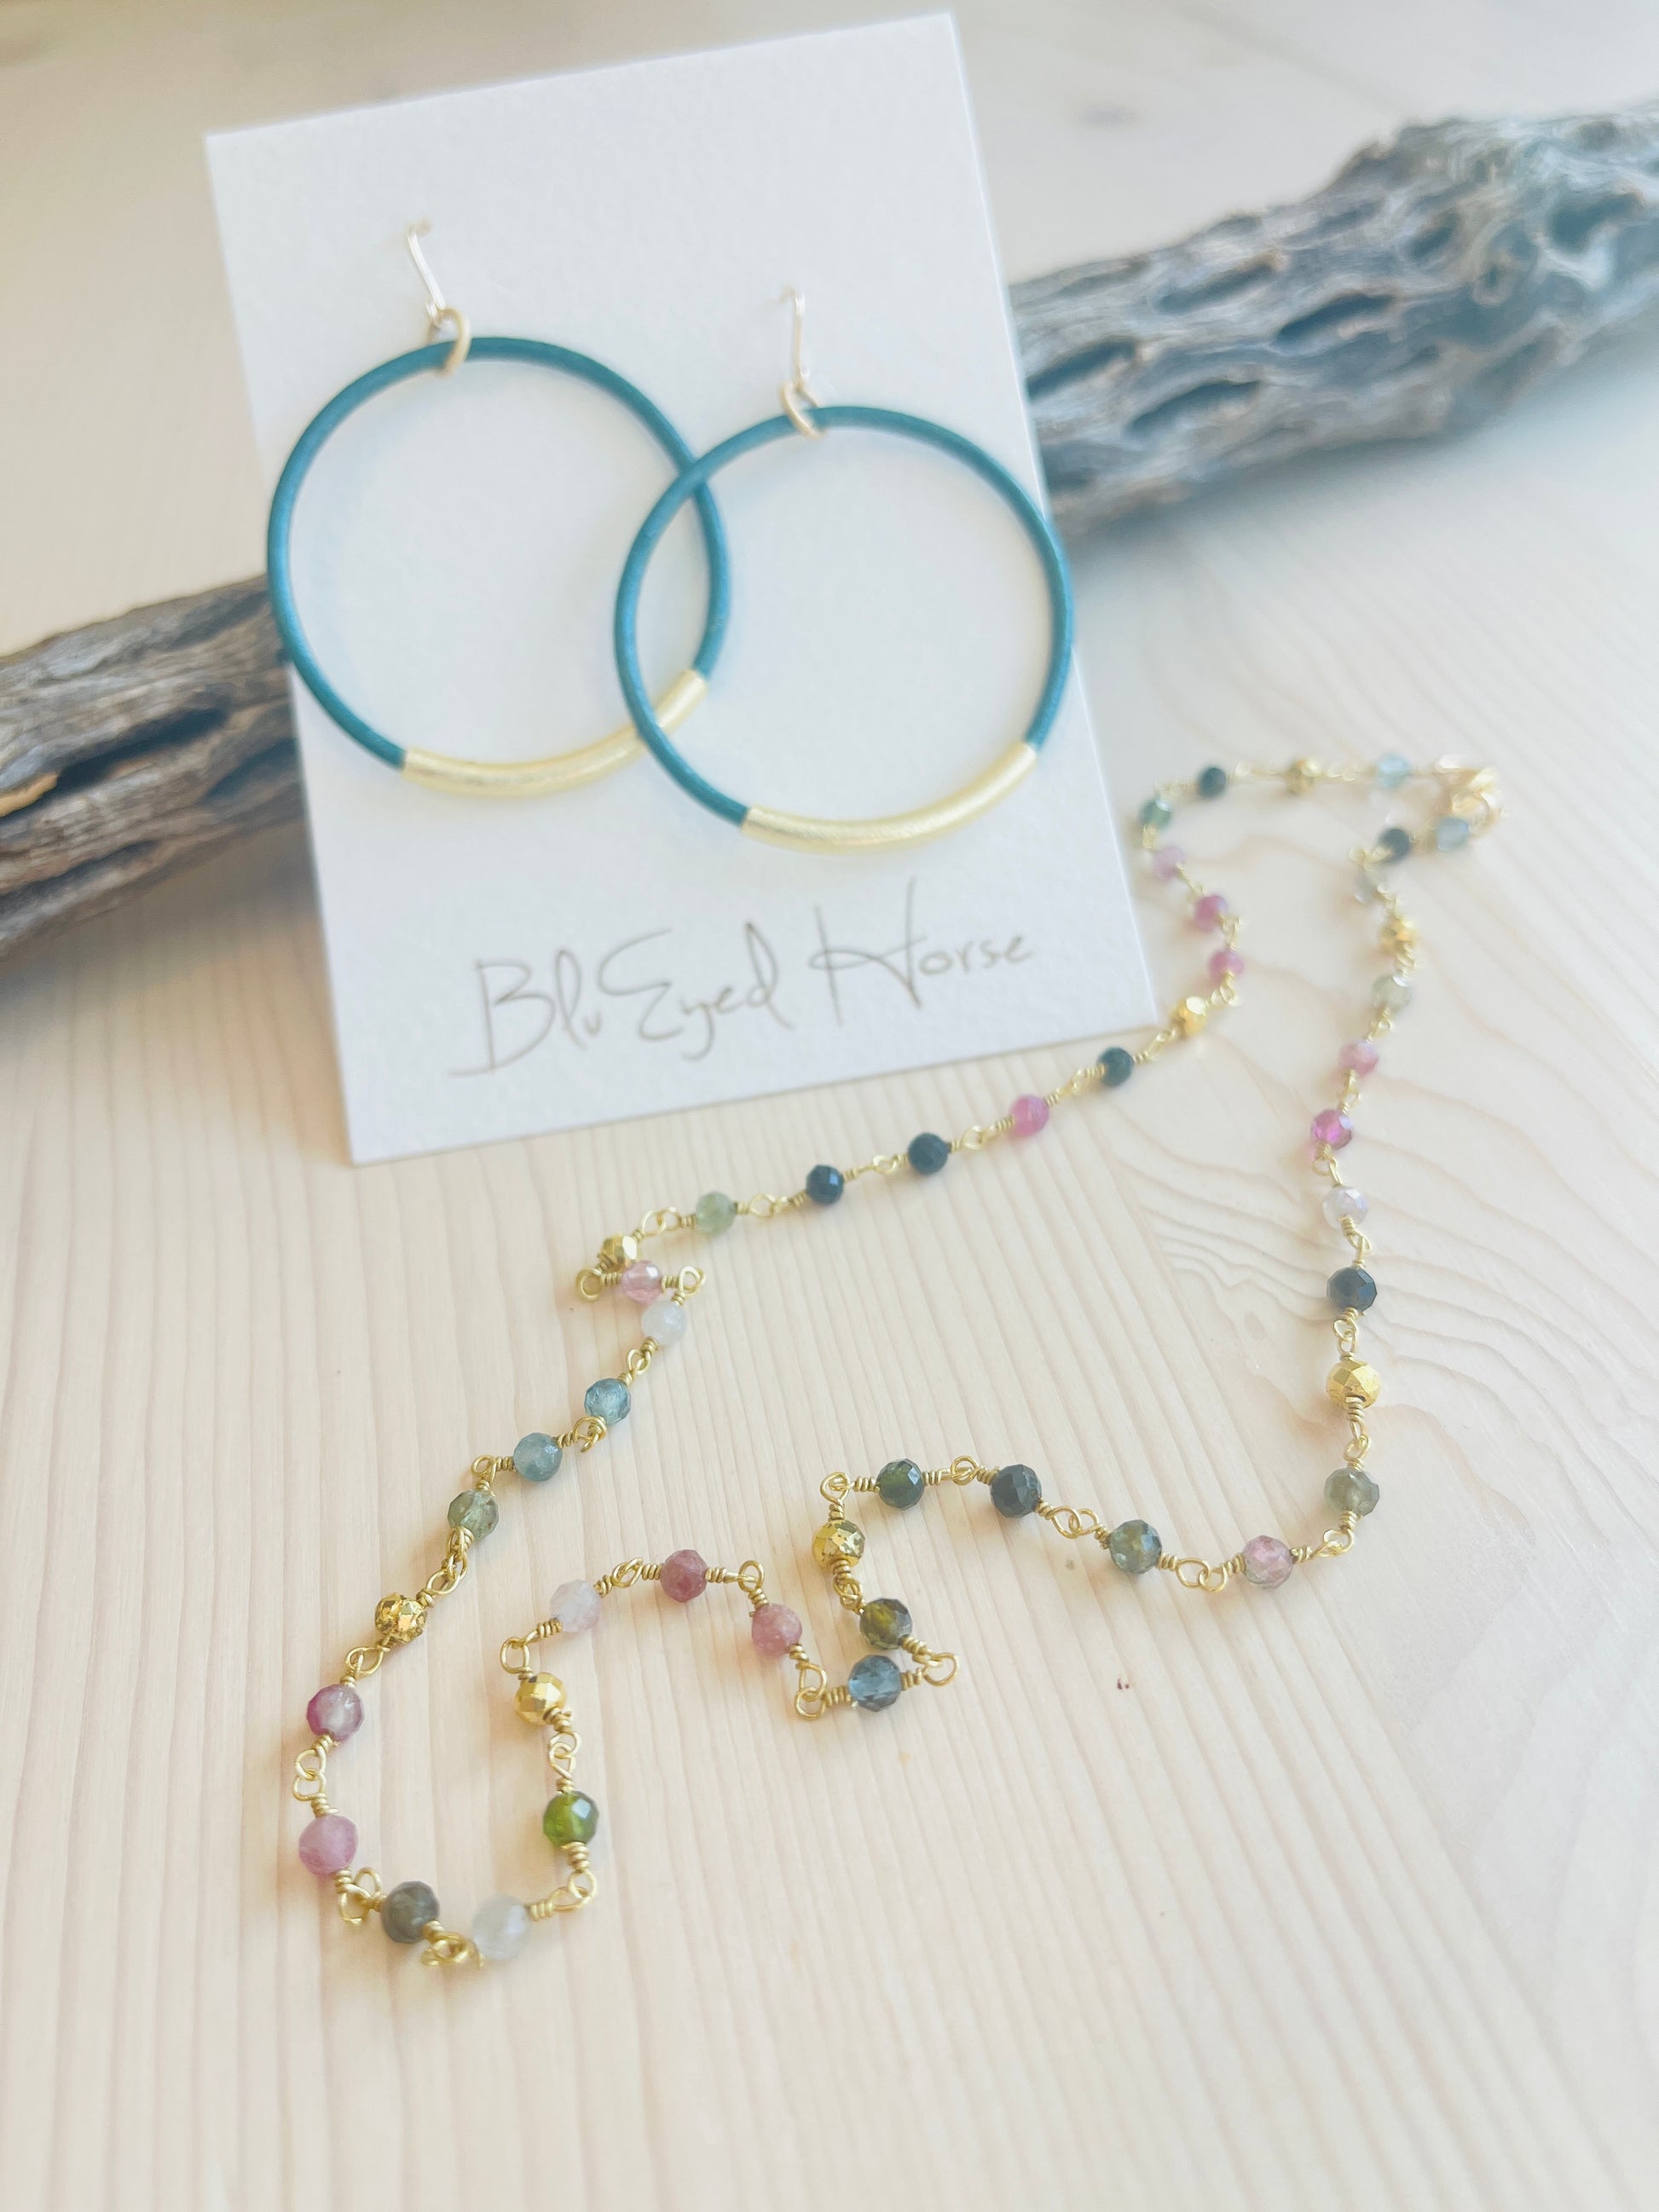 Tourmaline Choker with blue hoop earrings in the background displayed on driftwood